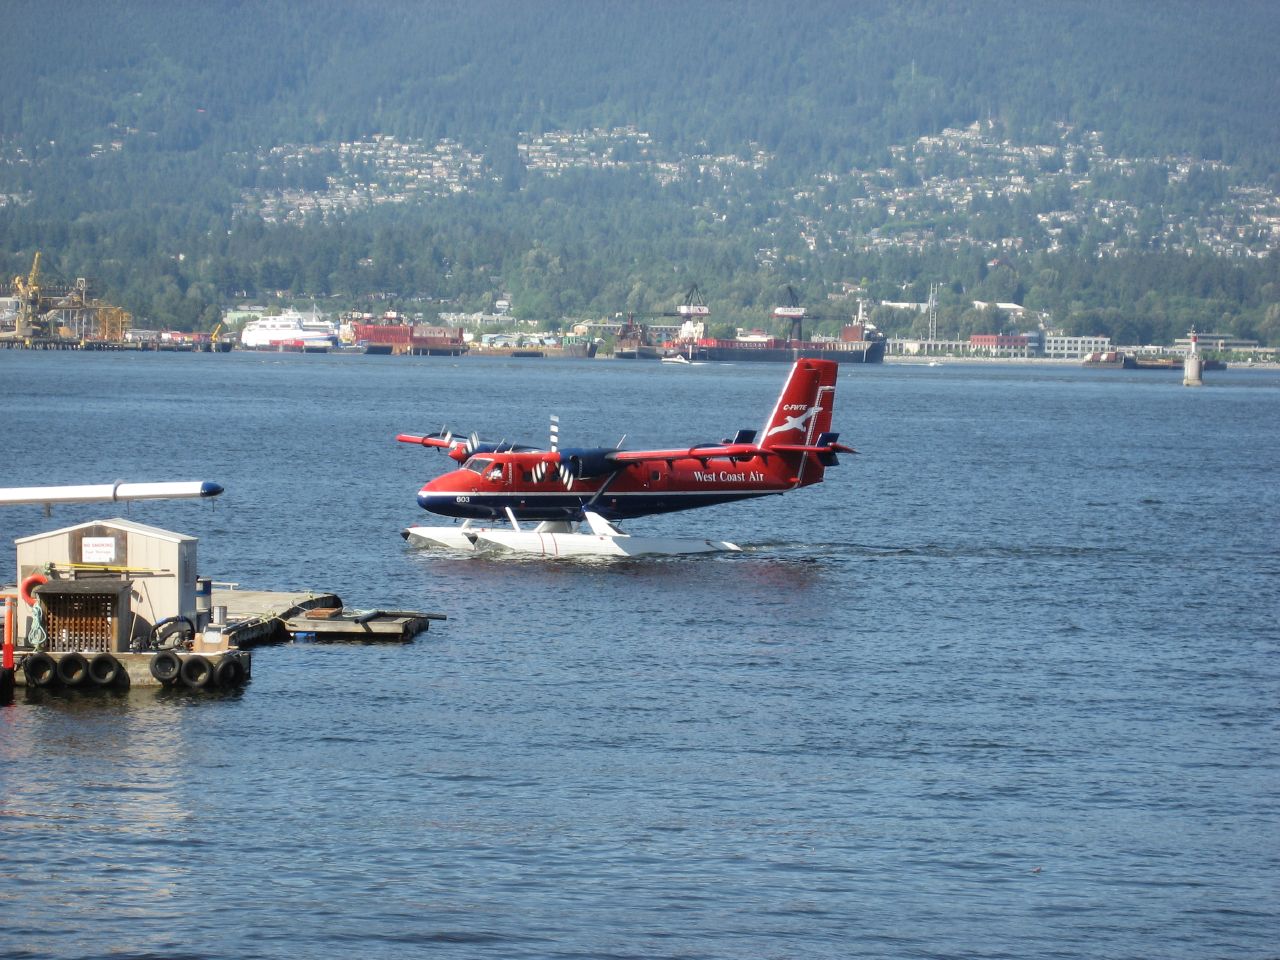 a red and white plane flying over water next to a boat